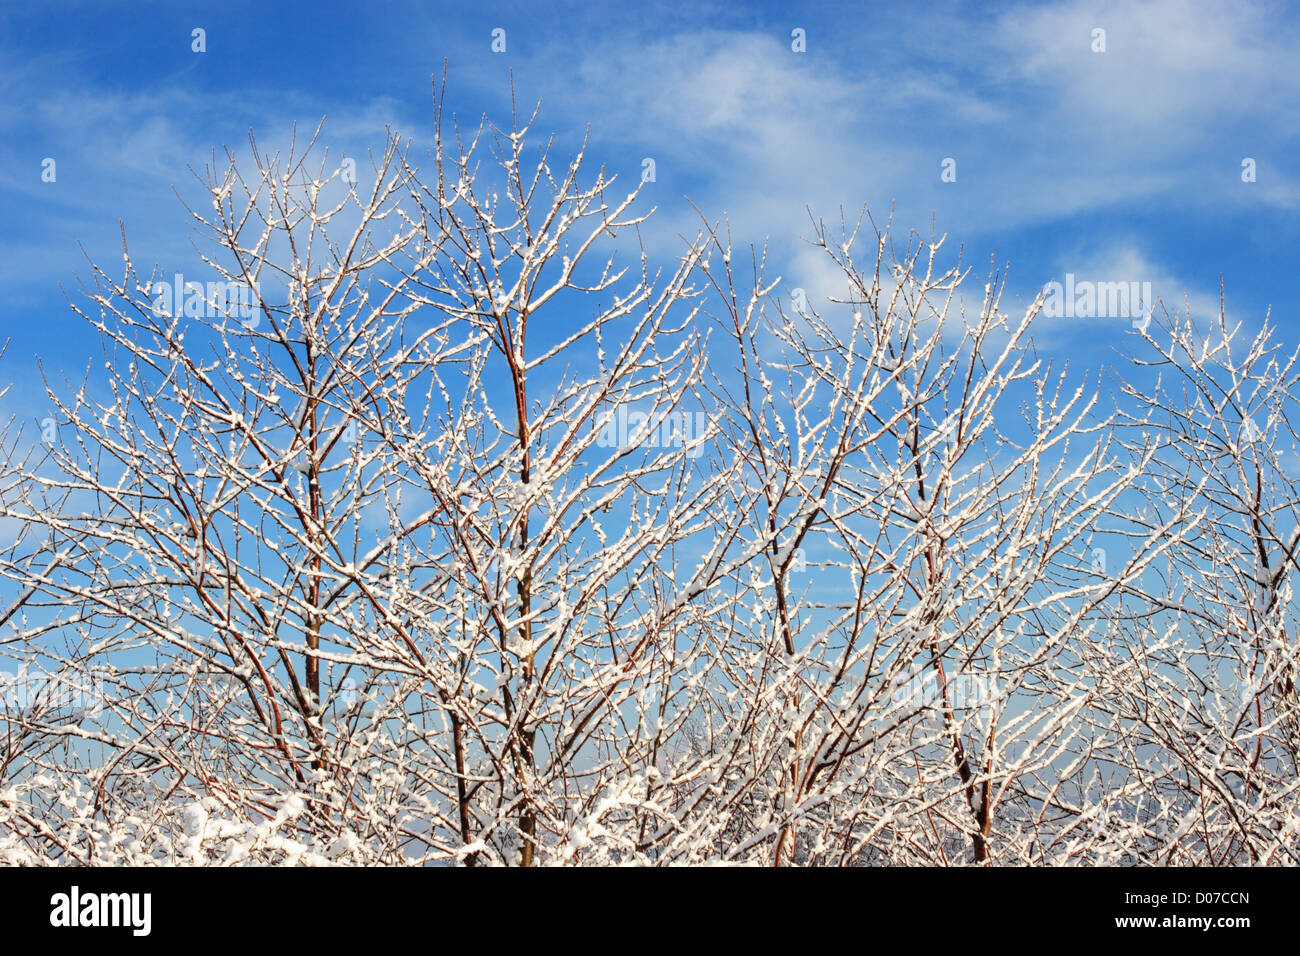 Tree branches covered with snow against a blue sky north east England UK Stock Photo